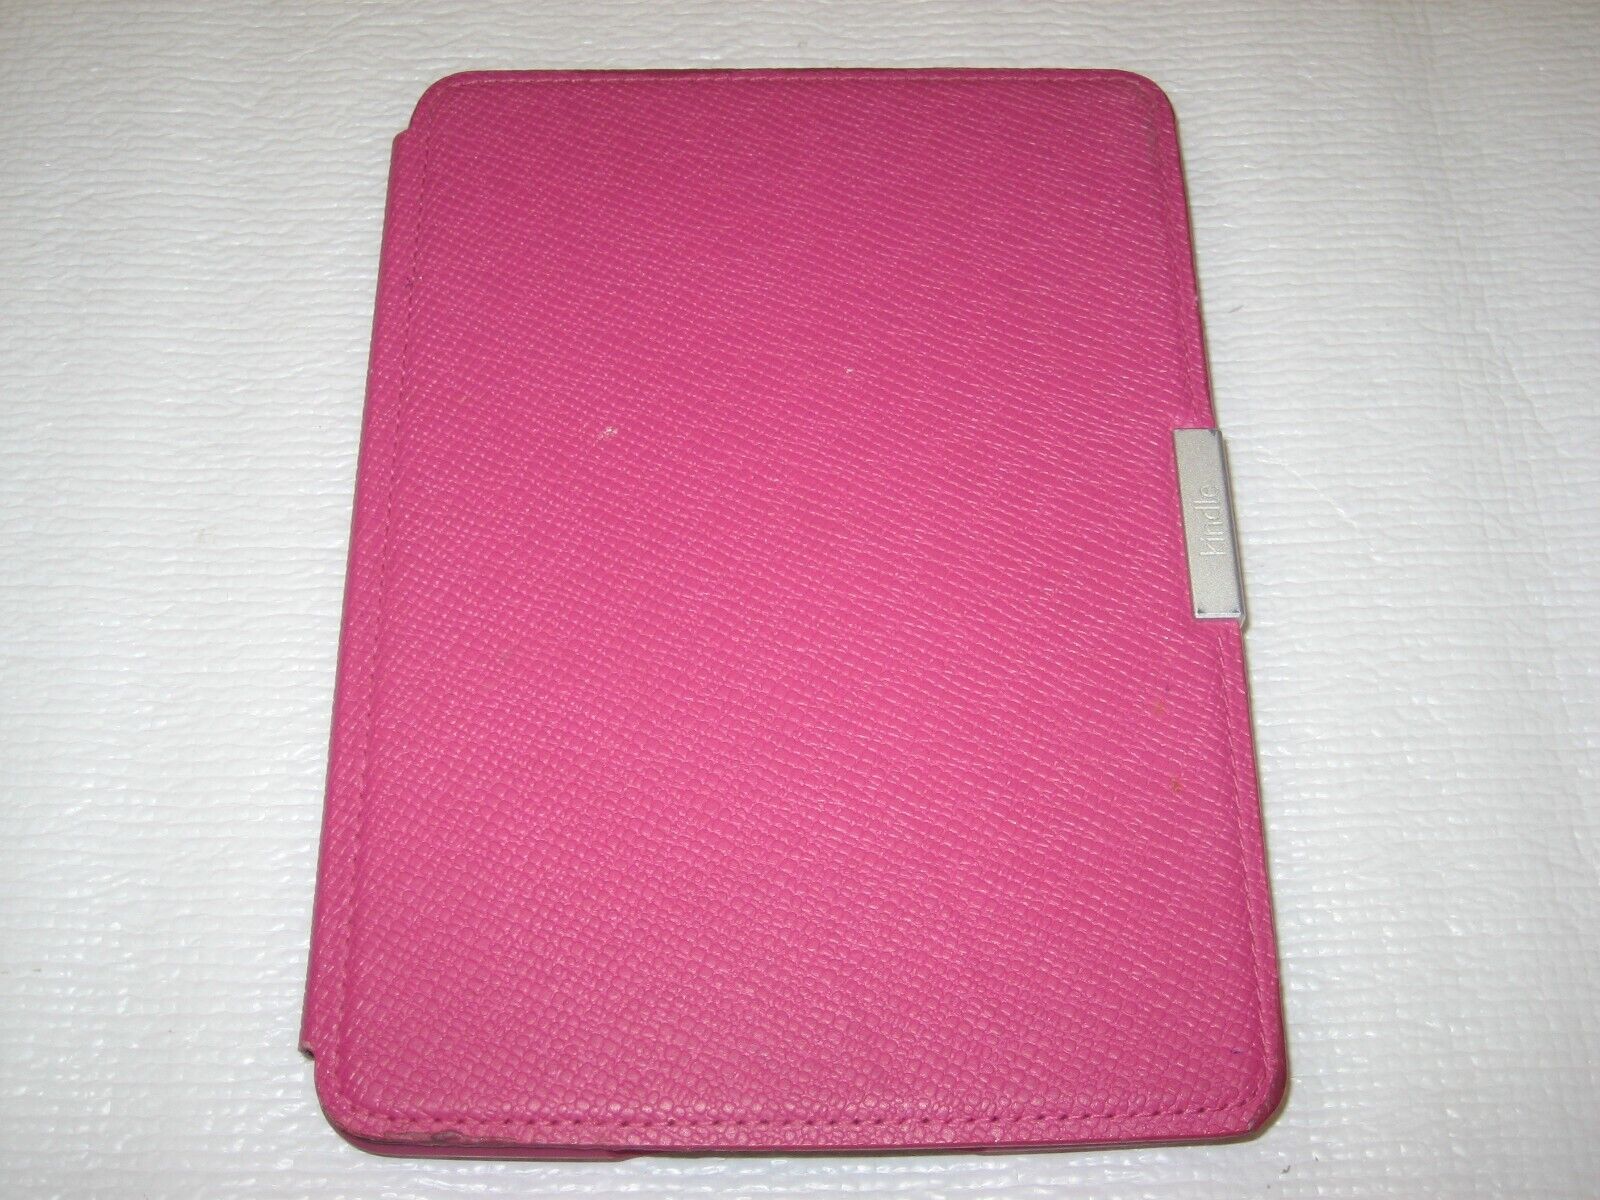 Original Amazon Pink Leather Cover Case for Kindle Paperwhite 5th, 6th, 7th Gen